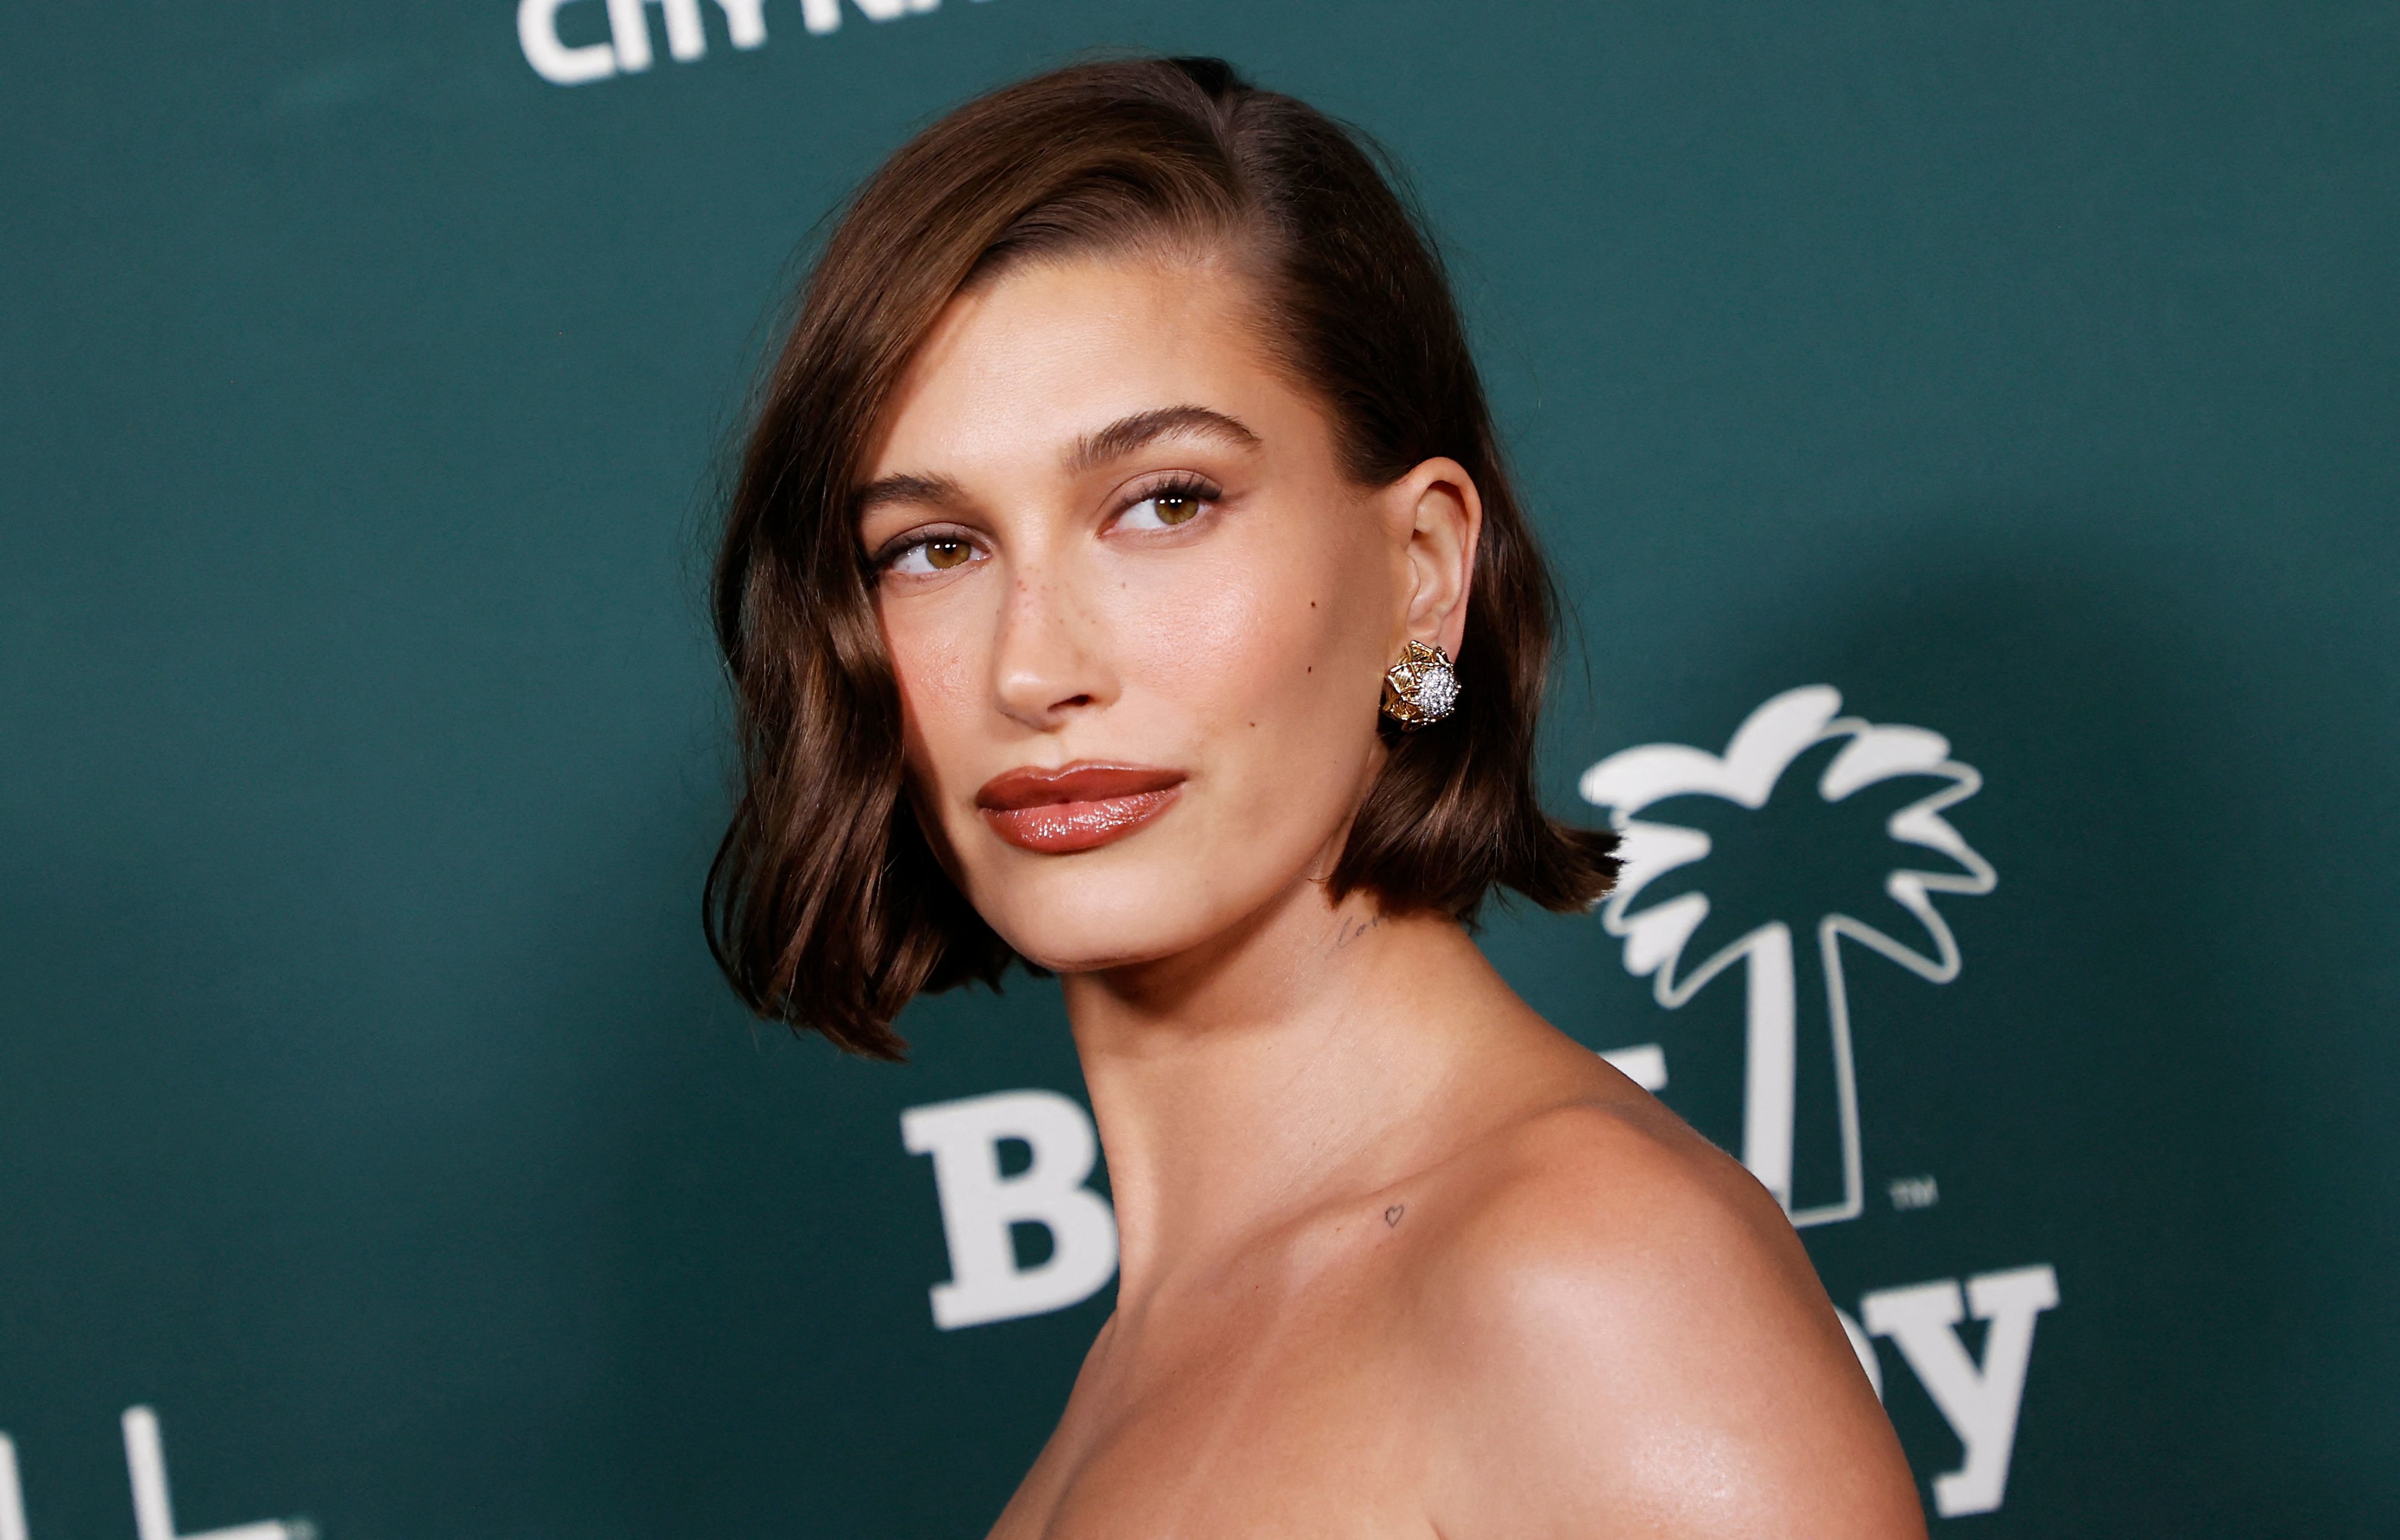 Hailey Bieber poses at an event wearing a chic shoulder-baring outfit with statement earrings